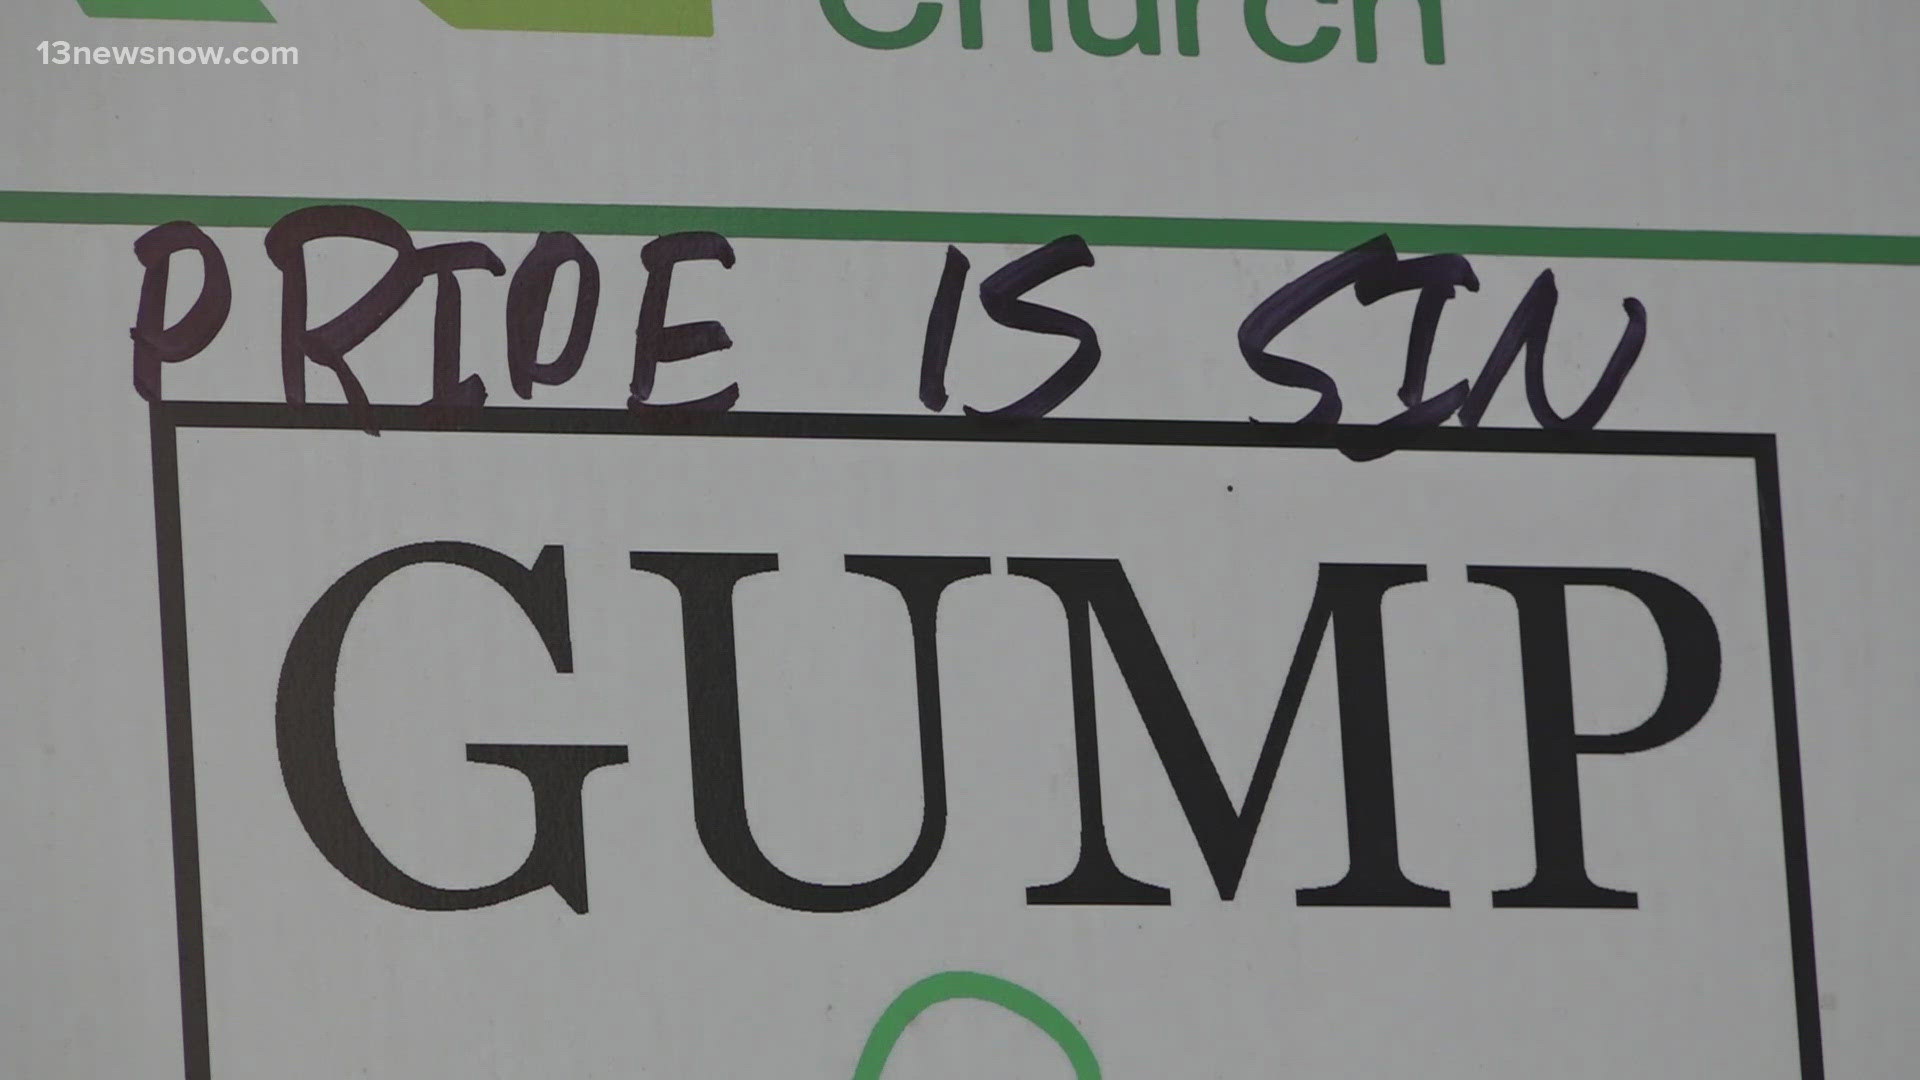 Church sign vandalized in Ghent | 13newsnow.com